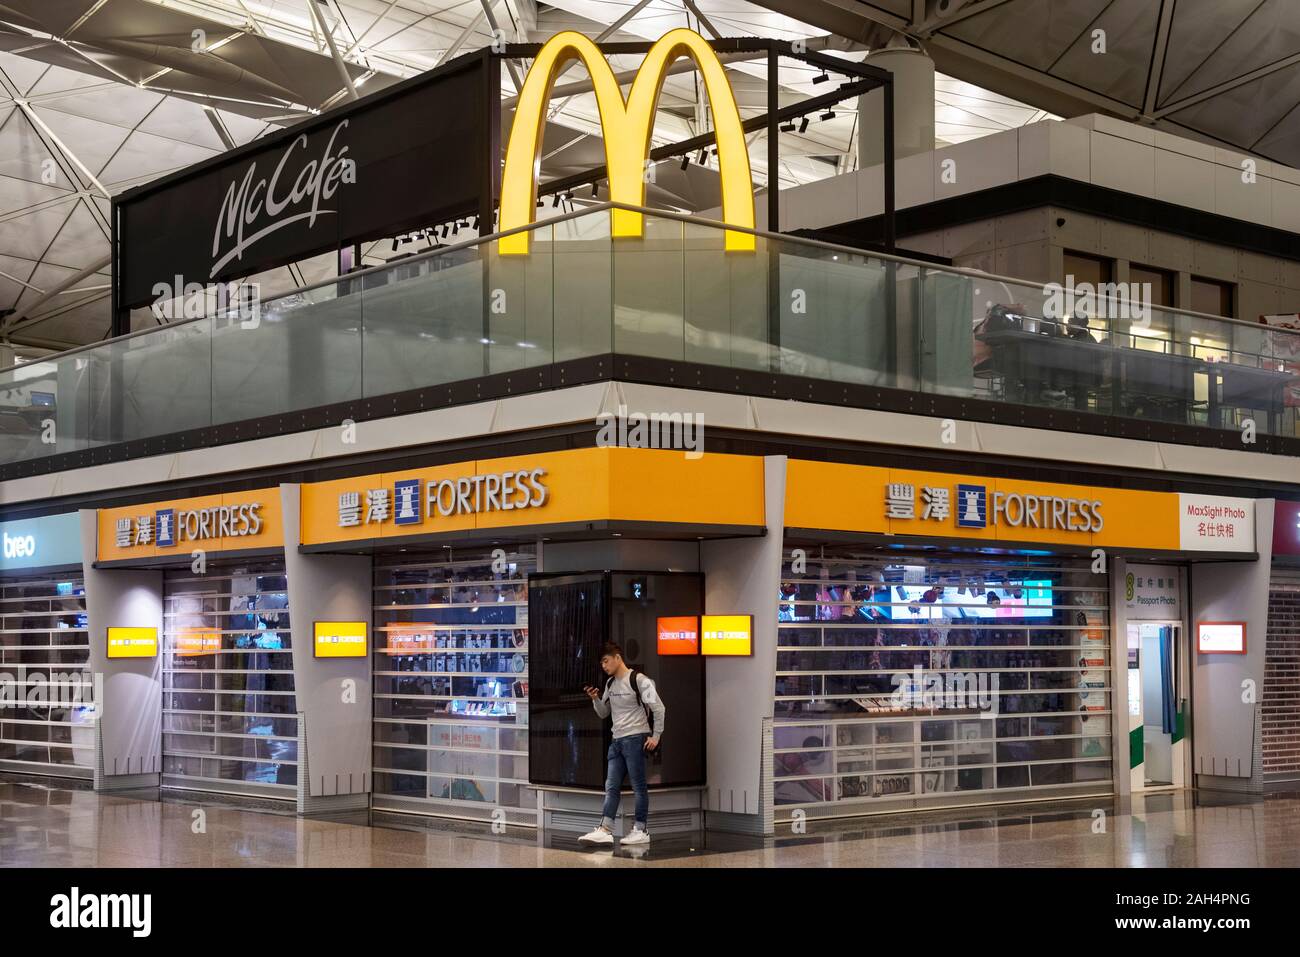 A man stands under a large McDonald's fast-food restaurant logo and Hong Kong Electricity Group, Fortress store at the Hong Kong international airport. Stock Photo